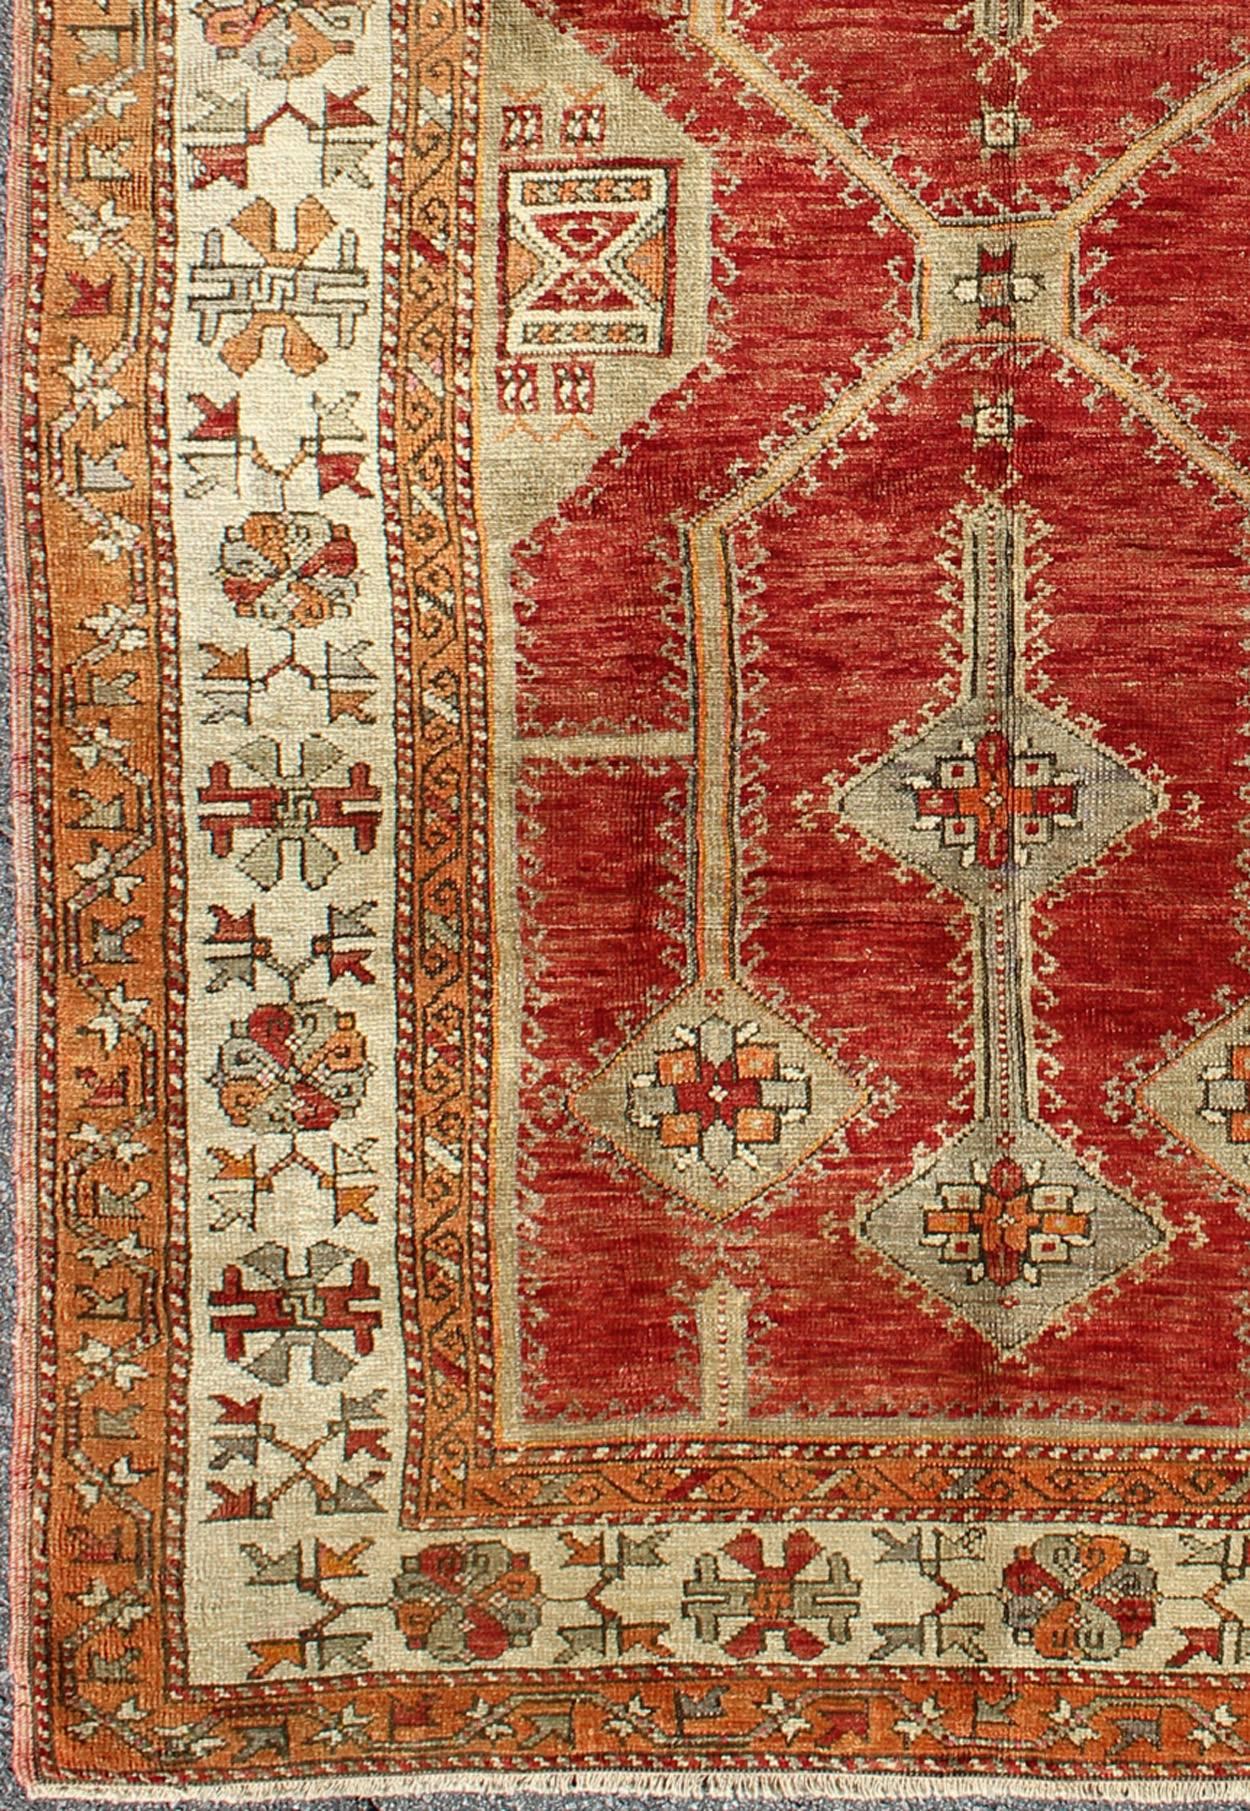 Antique Turkish Oushak Rug With Geometric Design in Red, Light Green & L. Orange.
Antique Turkish Oushak Rug with All-Over Geometric Design in Red, Light Green. rug/NA-75419
This unusual and uniquely designed  antique Turkish Oushak carpet was